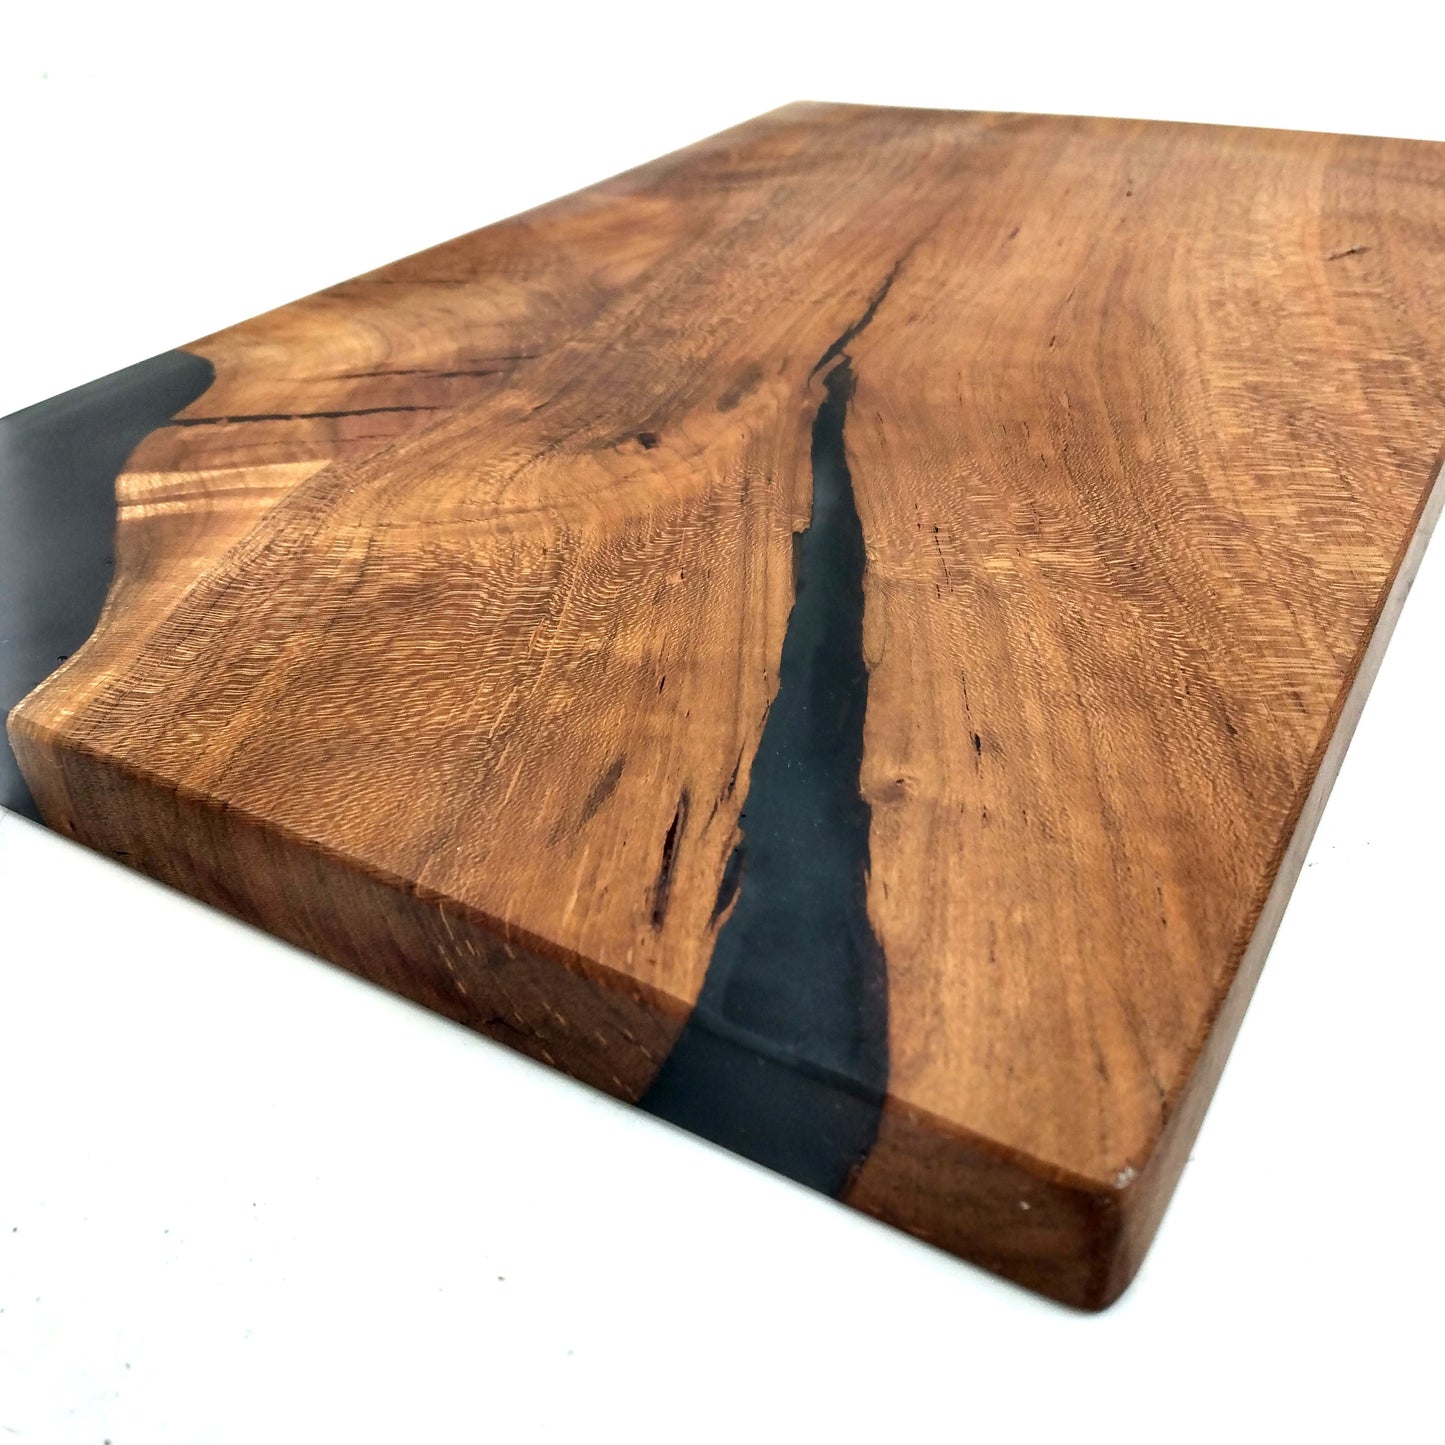 Translucent Epoxy and Cherry Serving Board